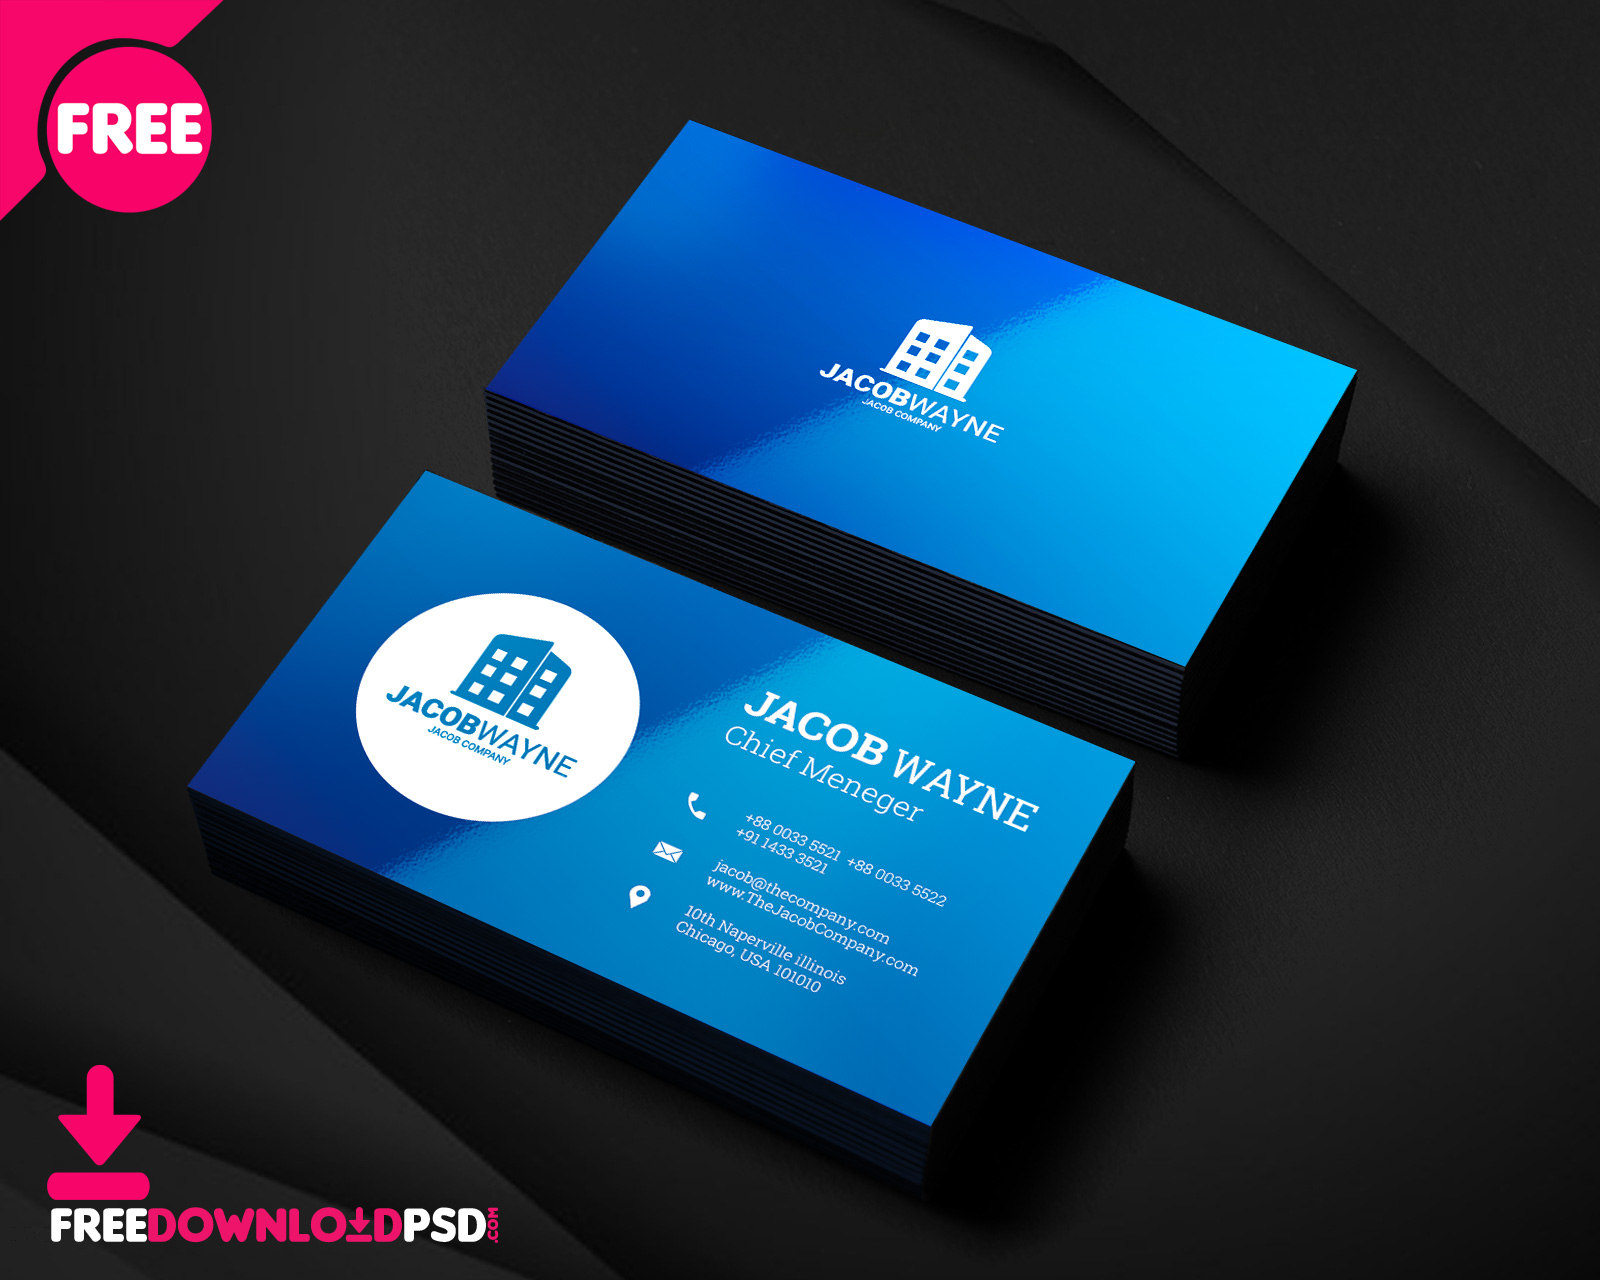 Real Estate Business Card Psd | Freedownloadpsd Throughout Visiting Card Psd Template